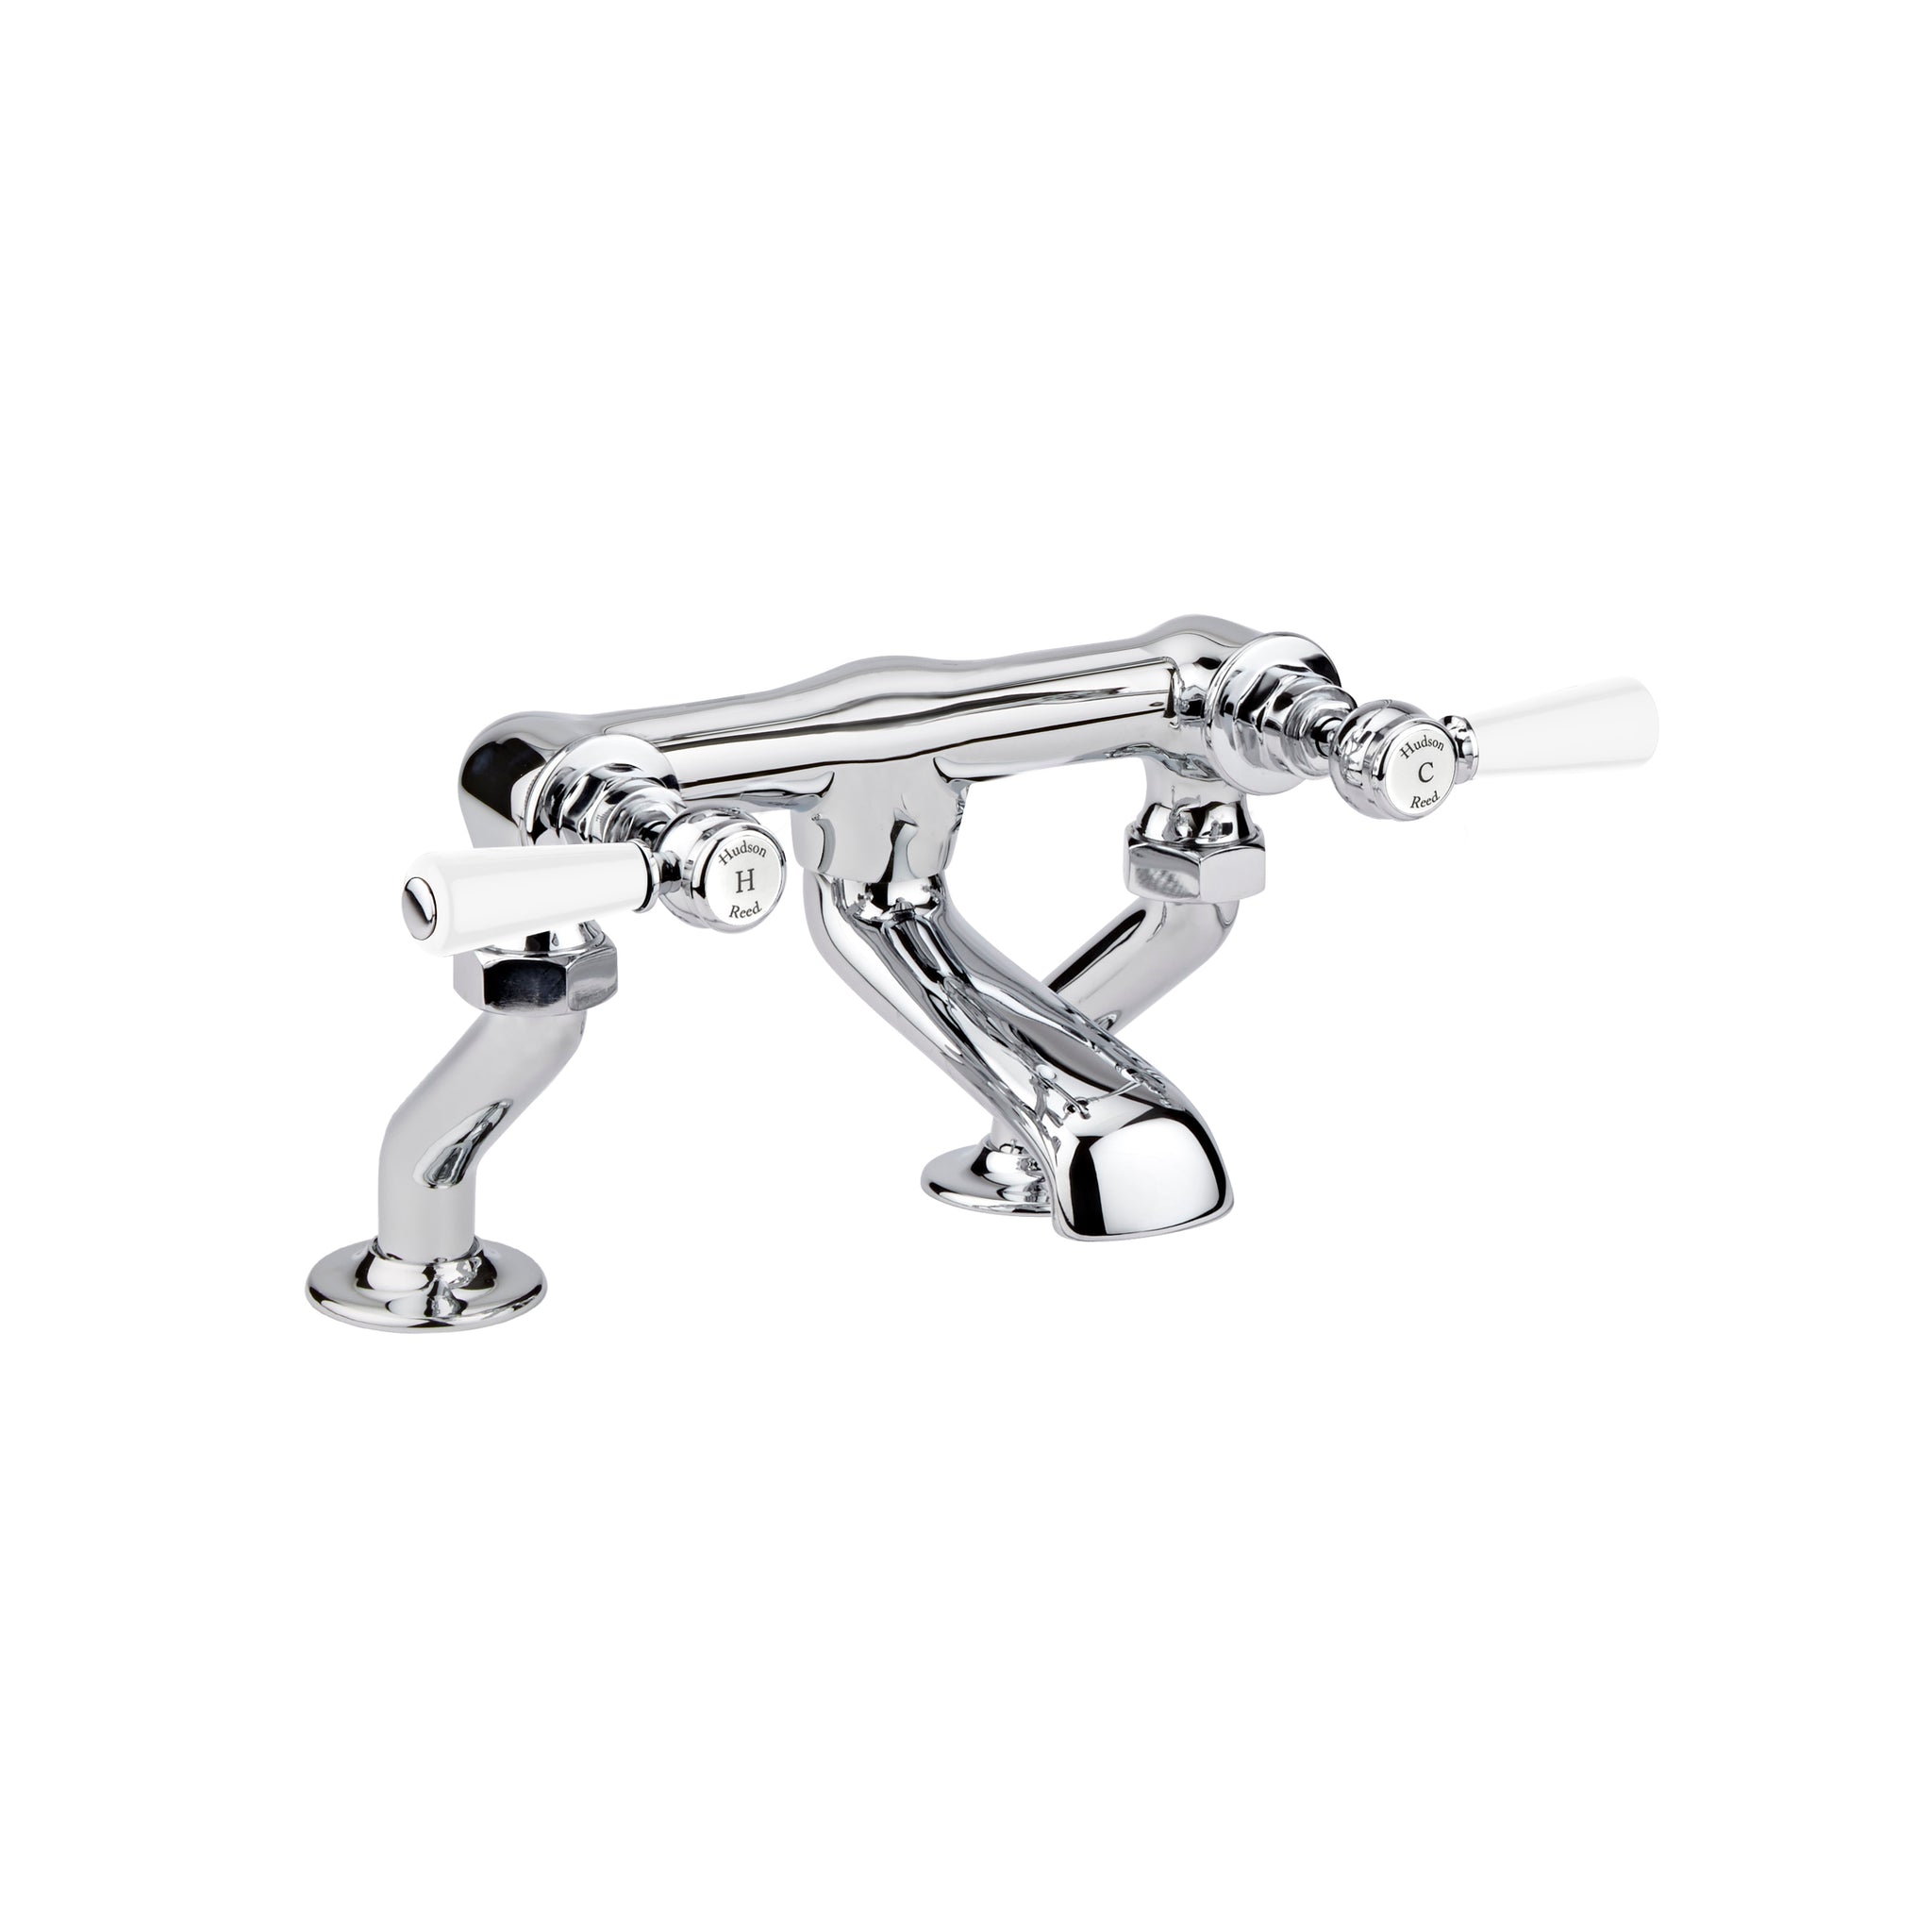 Hudson Reed White Topaz With Lever Deck Mounted Bath Filler